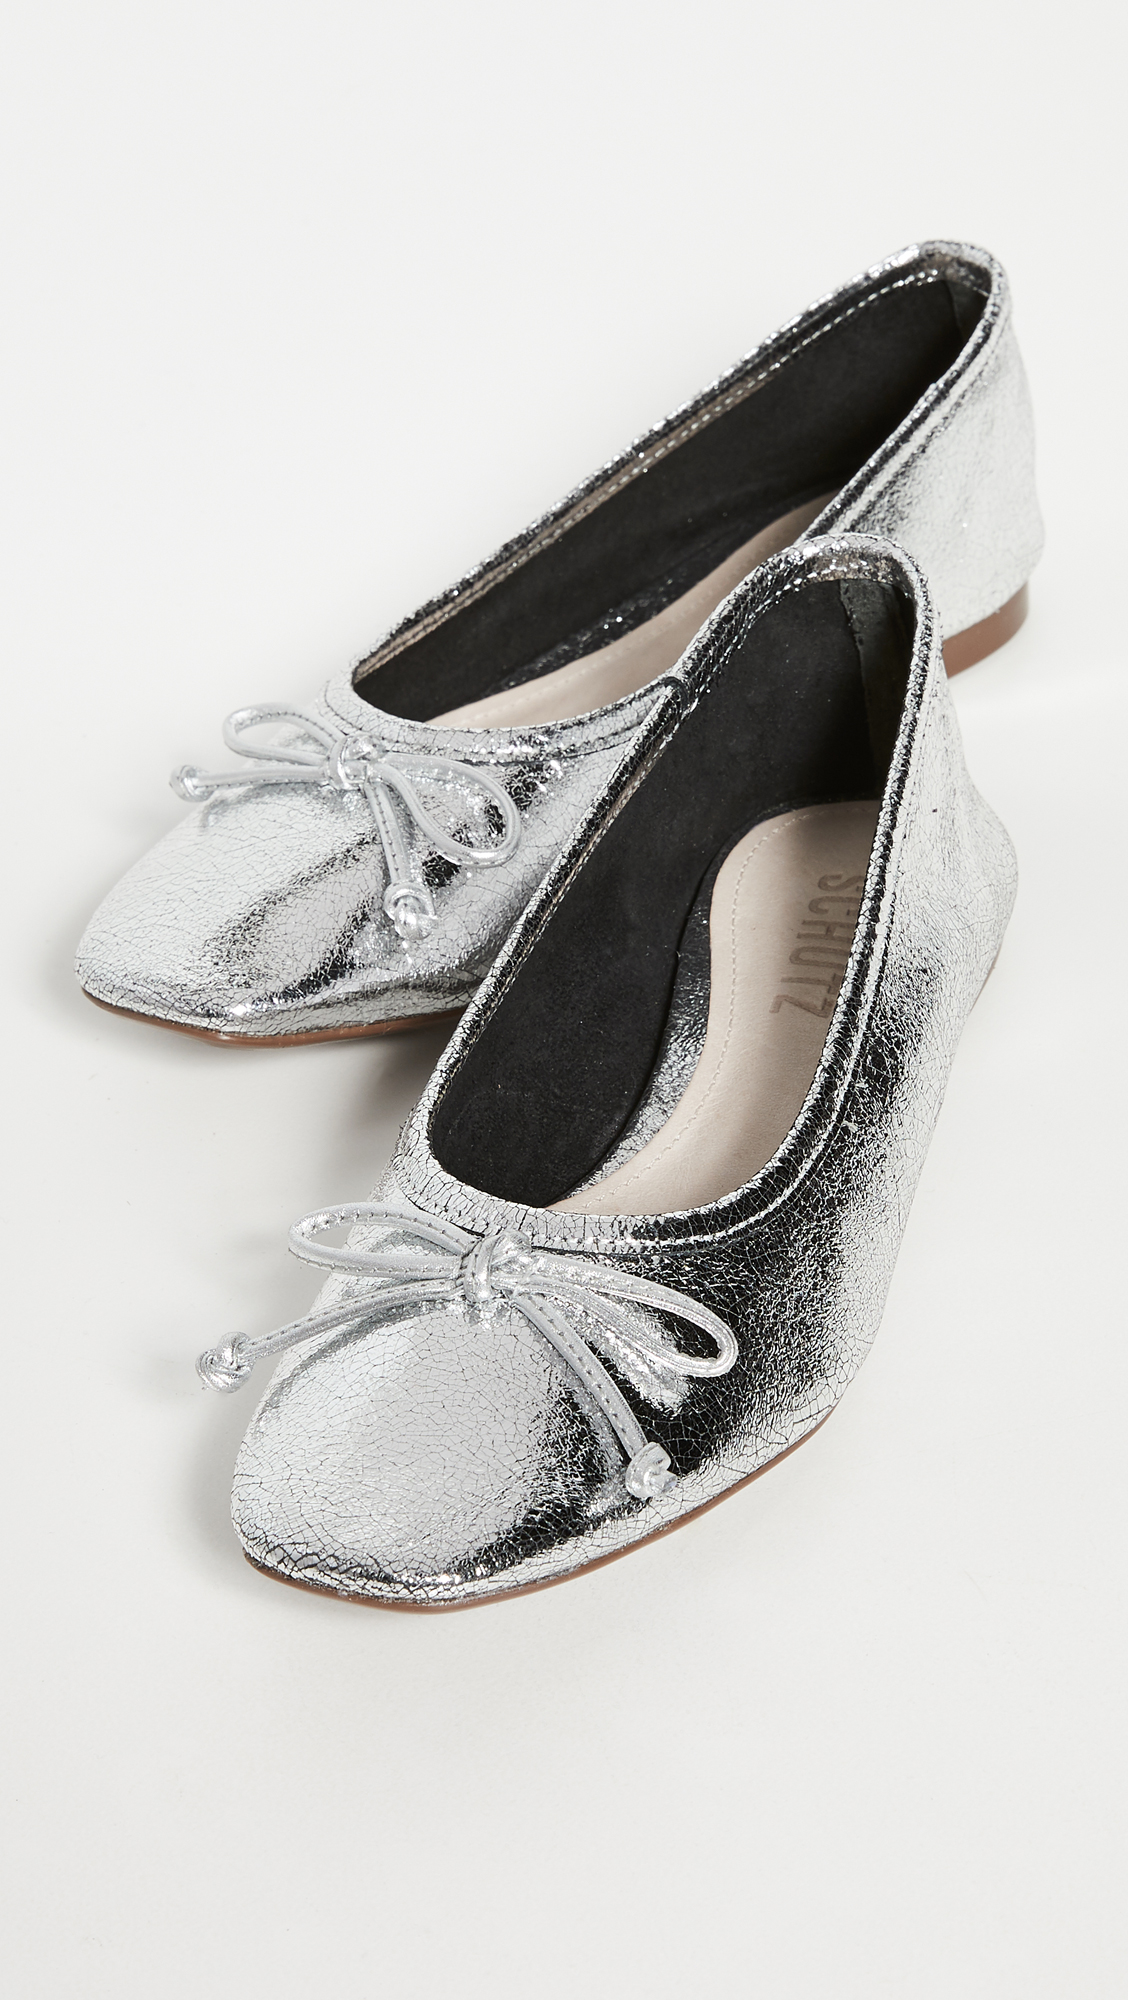 square toe ballet flats with ankle strap